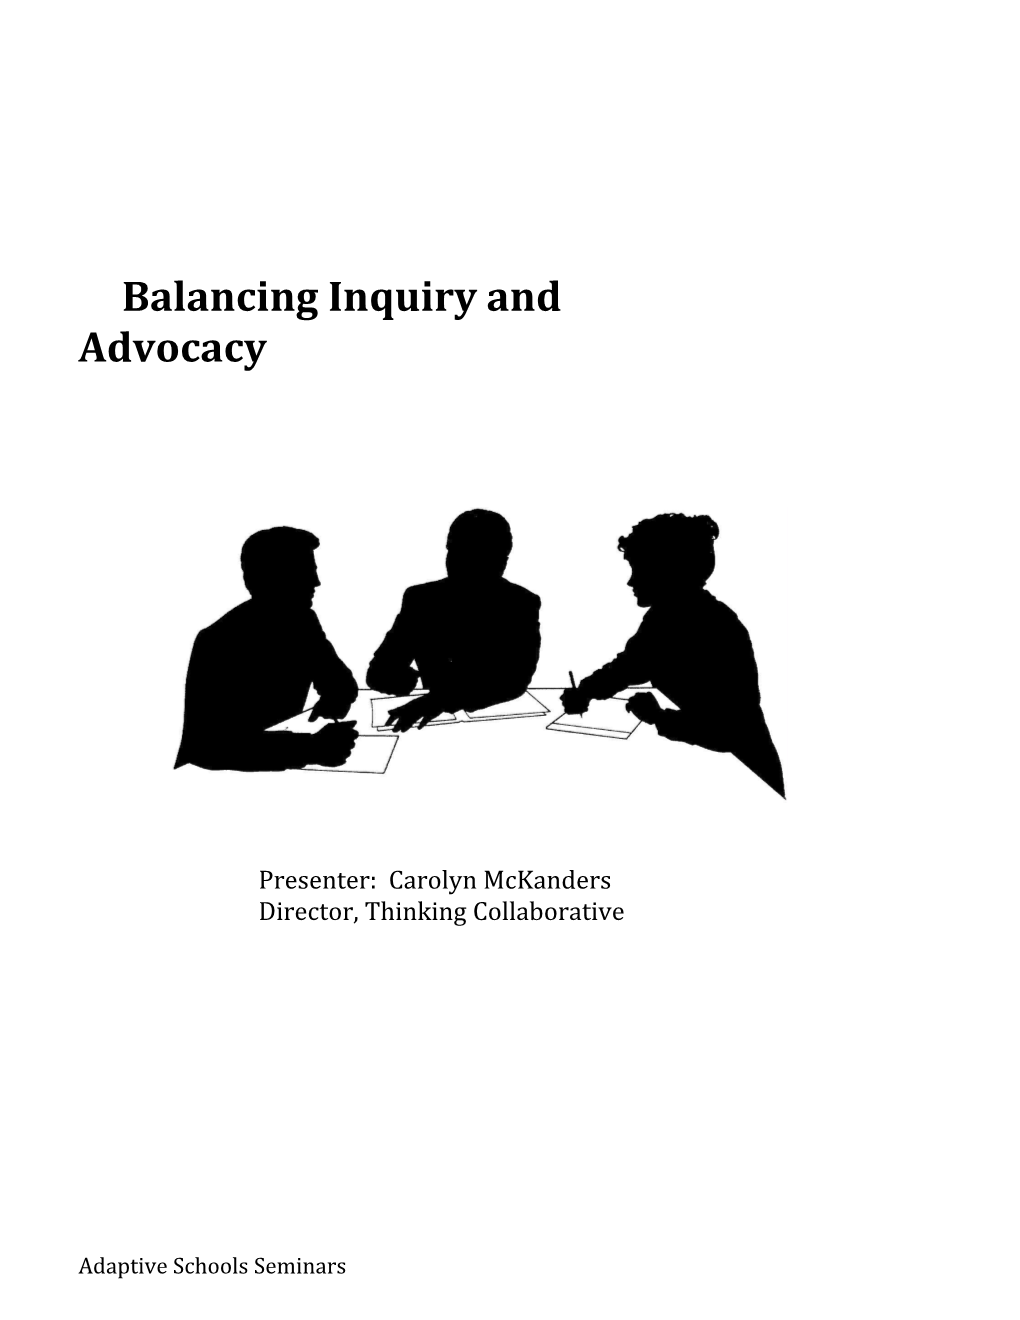 Balancing Inquiry and Advocacy